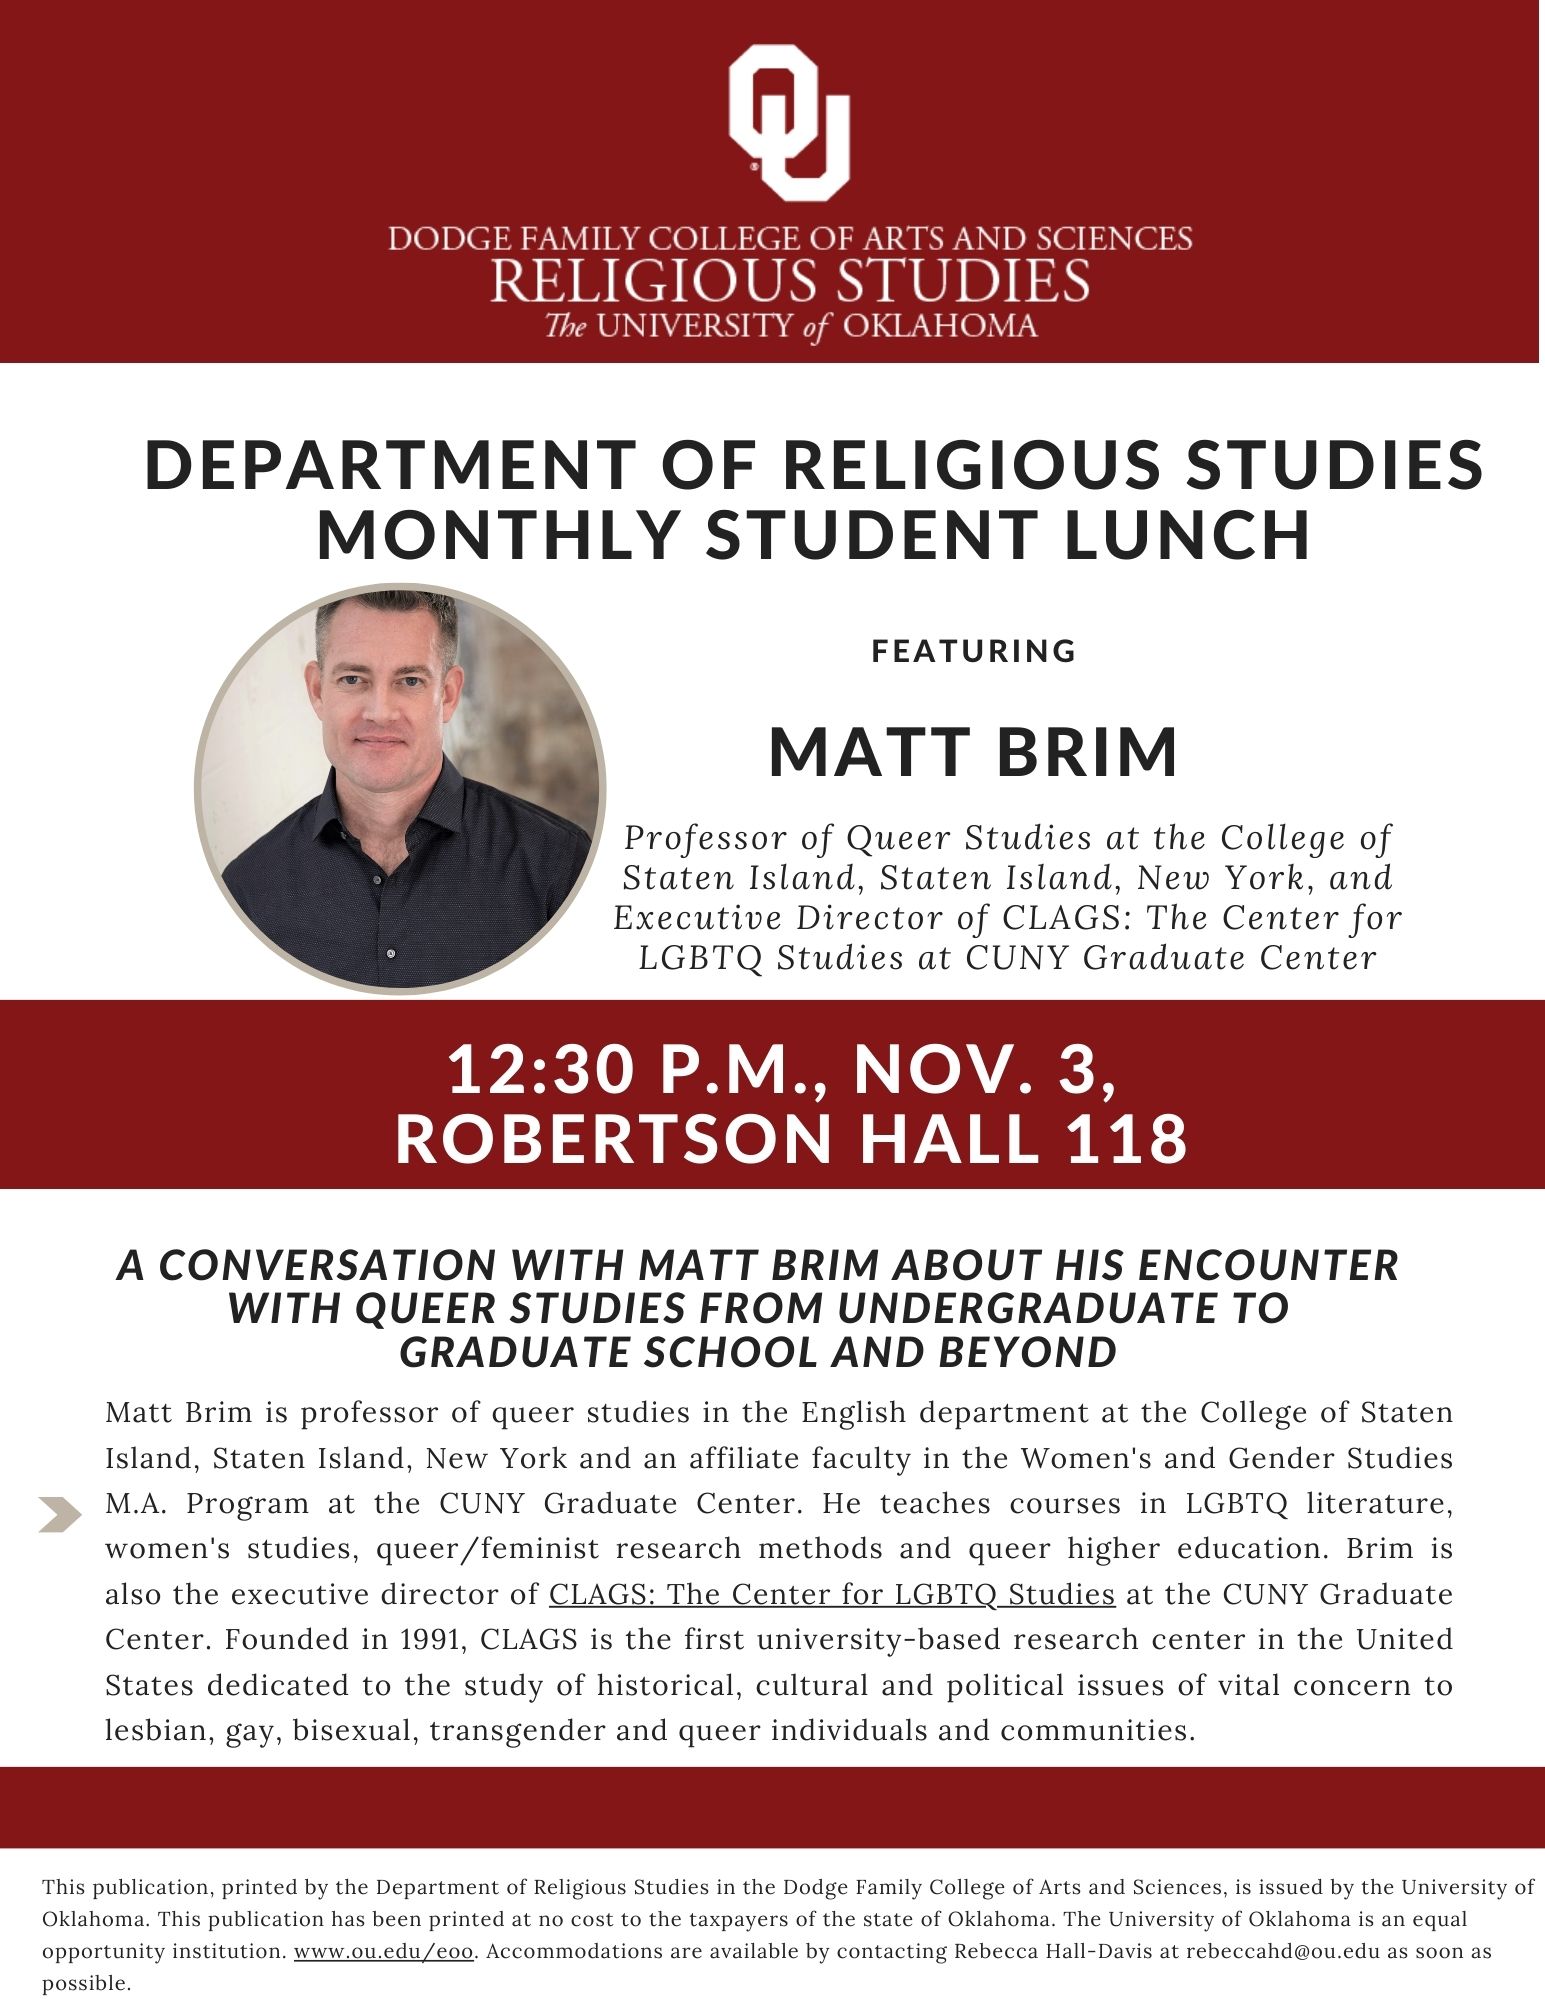 RELS students,  Please join us for the Religious Studies November student lunch featuring Matt Brim on Fri., Nov. 3 at 12:30 p.m. in the RELS conference room (Robertson 118).  Brim will have to conversation with you all about his encounters with queer studies as an undergrad, in grad school, and beyond.  See you there!